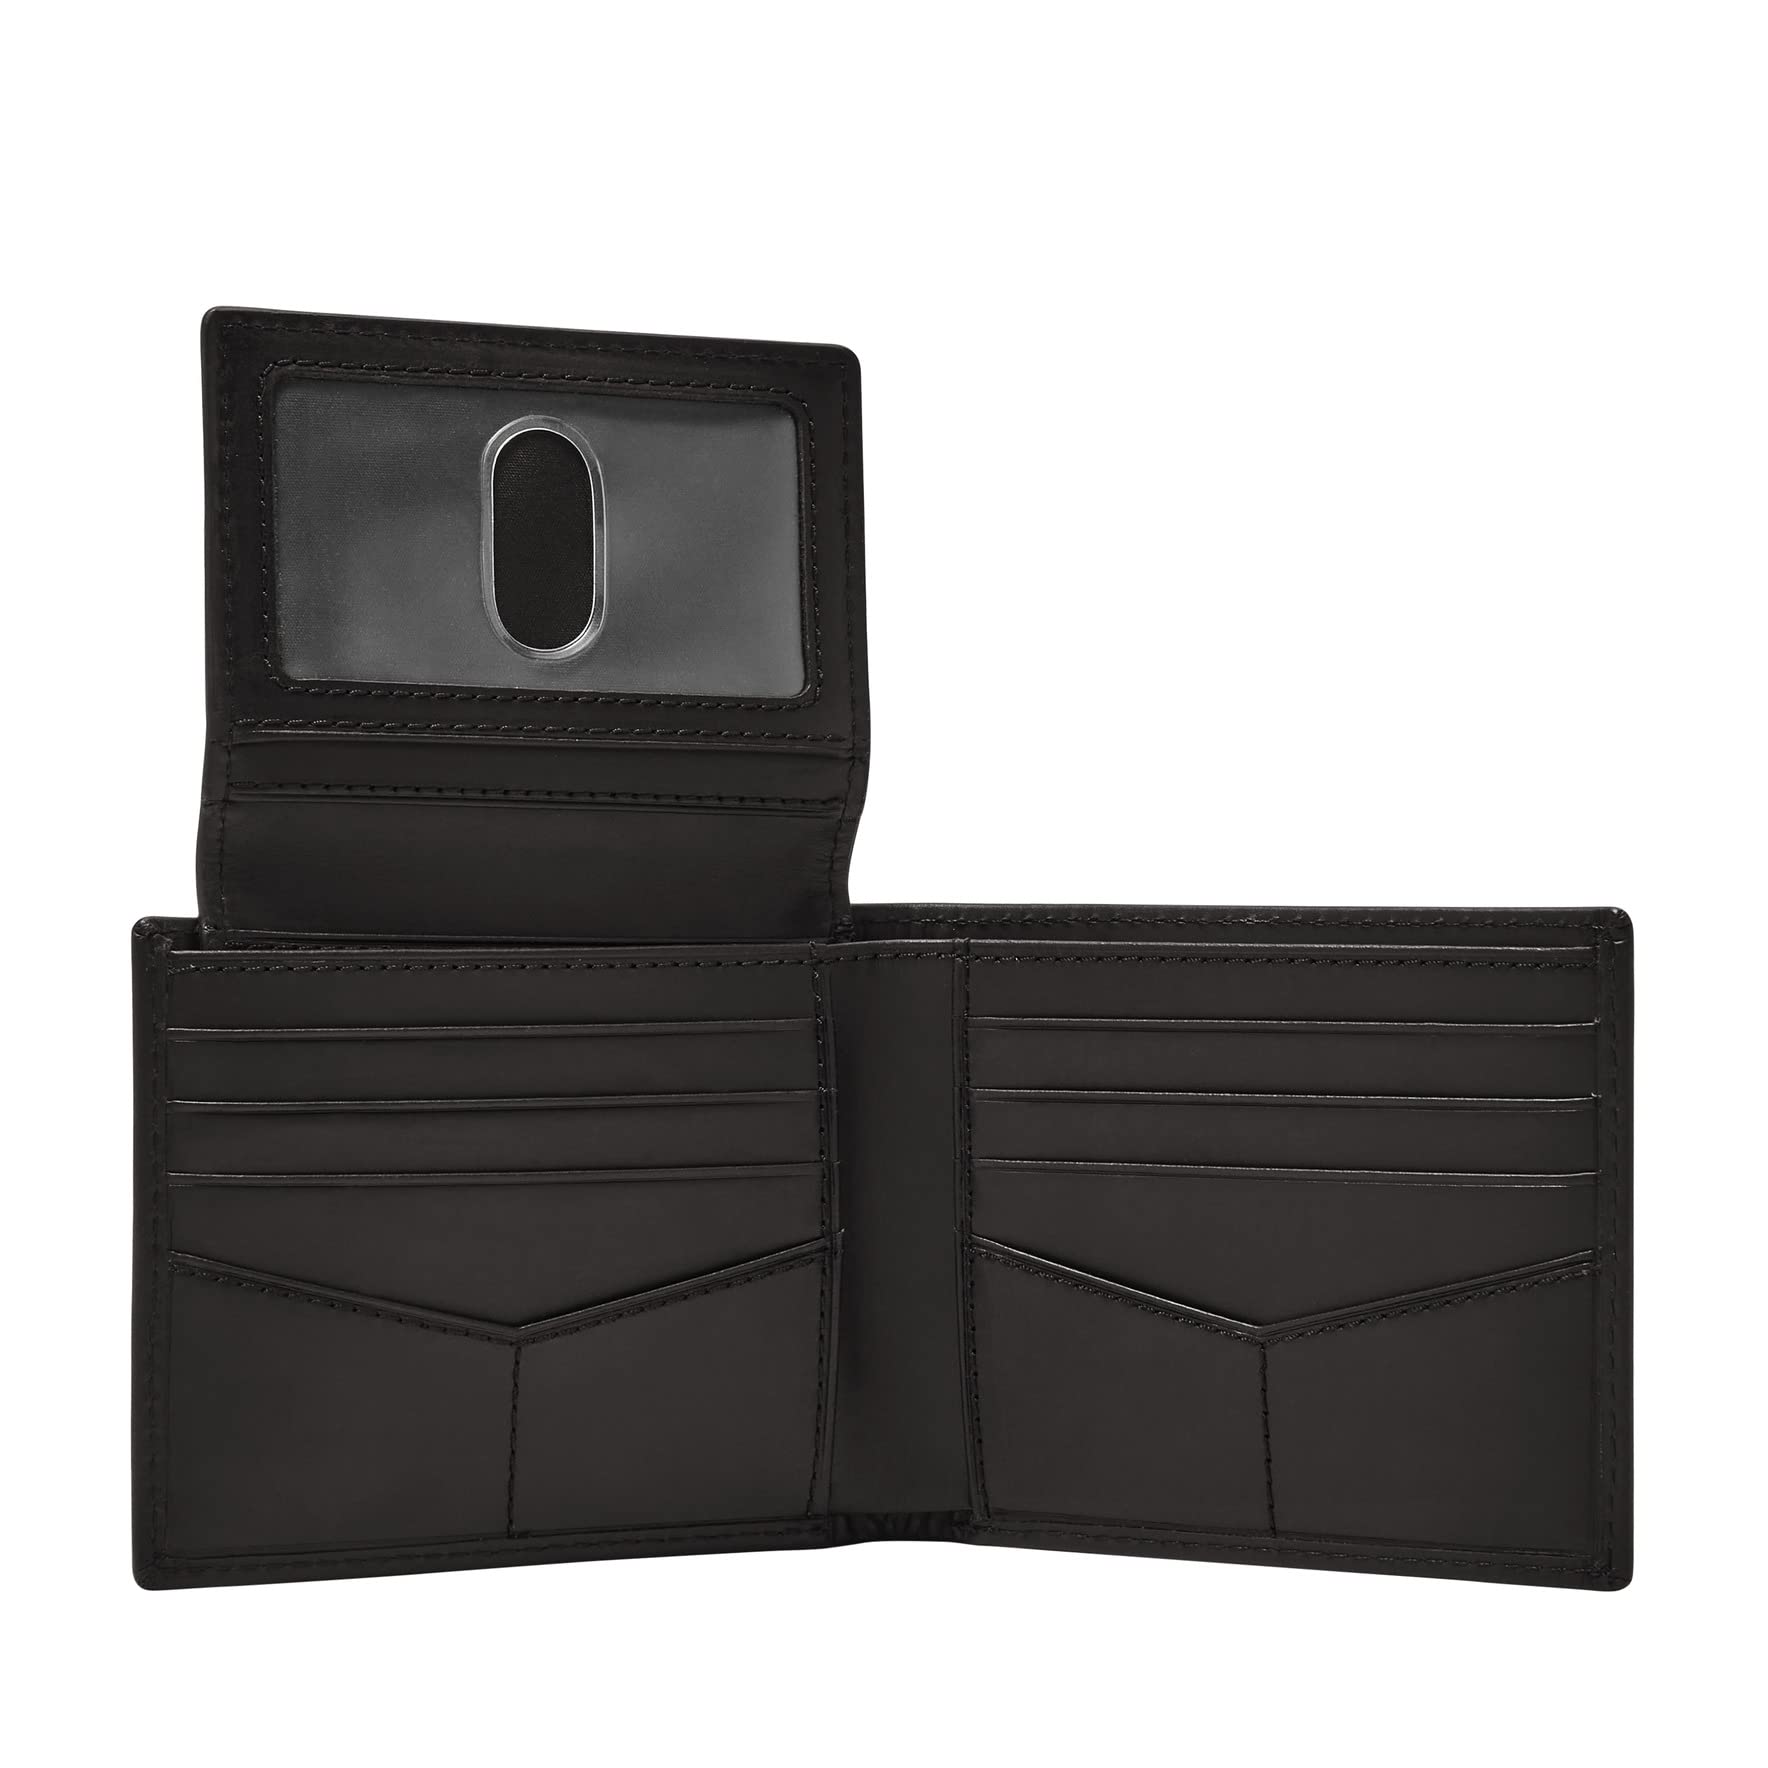 Fossil Men's Derrick Leather RFID-Blocking Bifold Passcase with Removable Card Case Wallet for Men